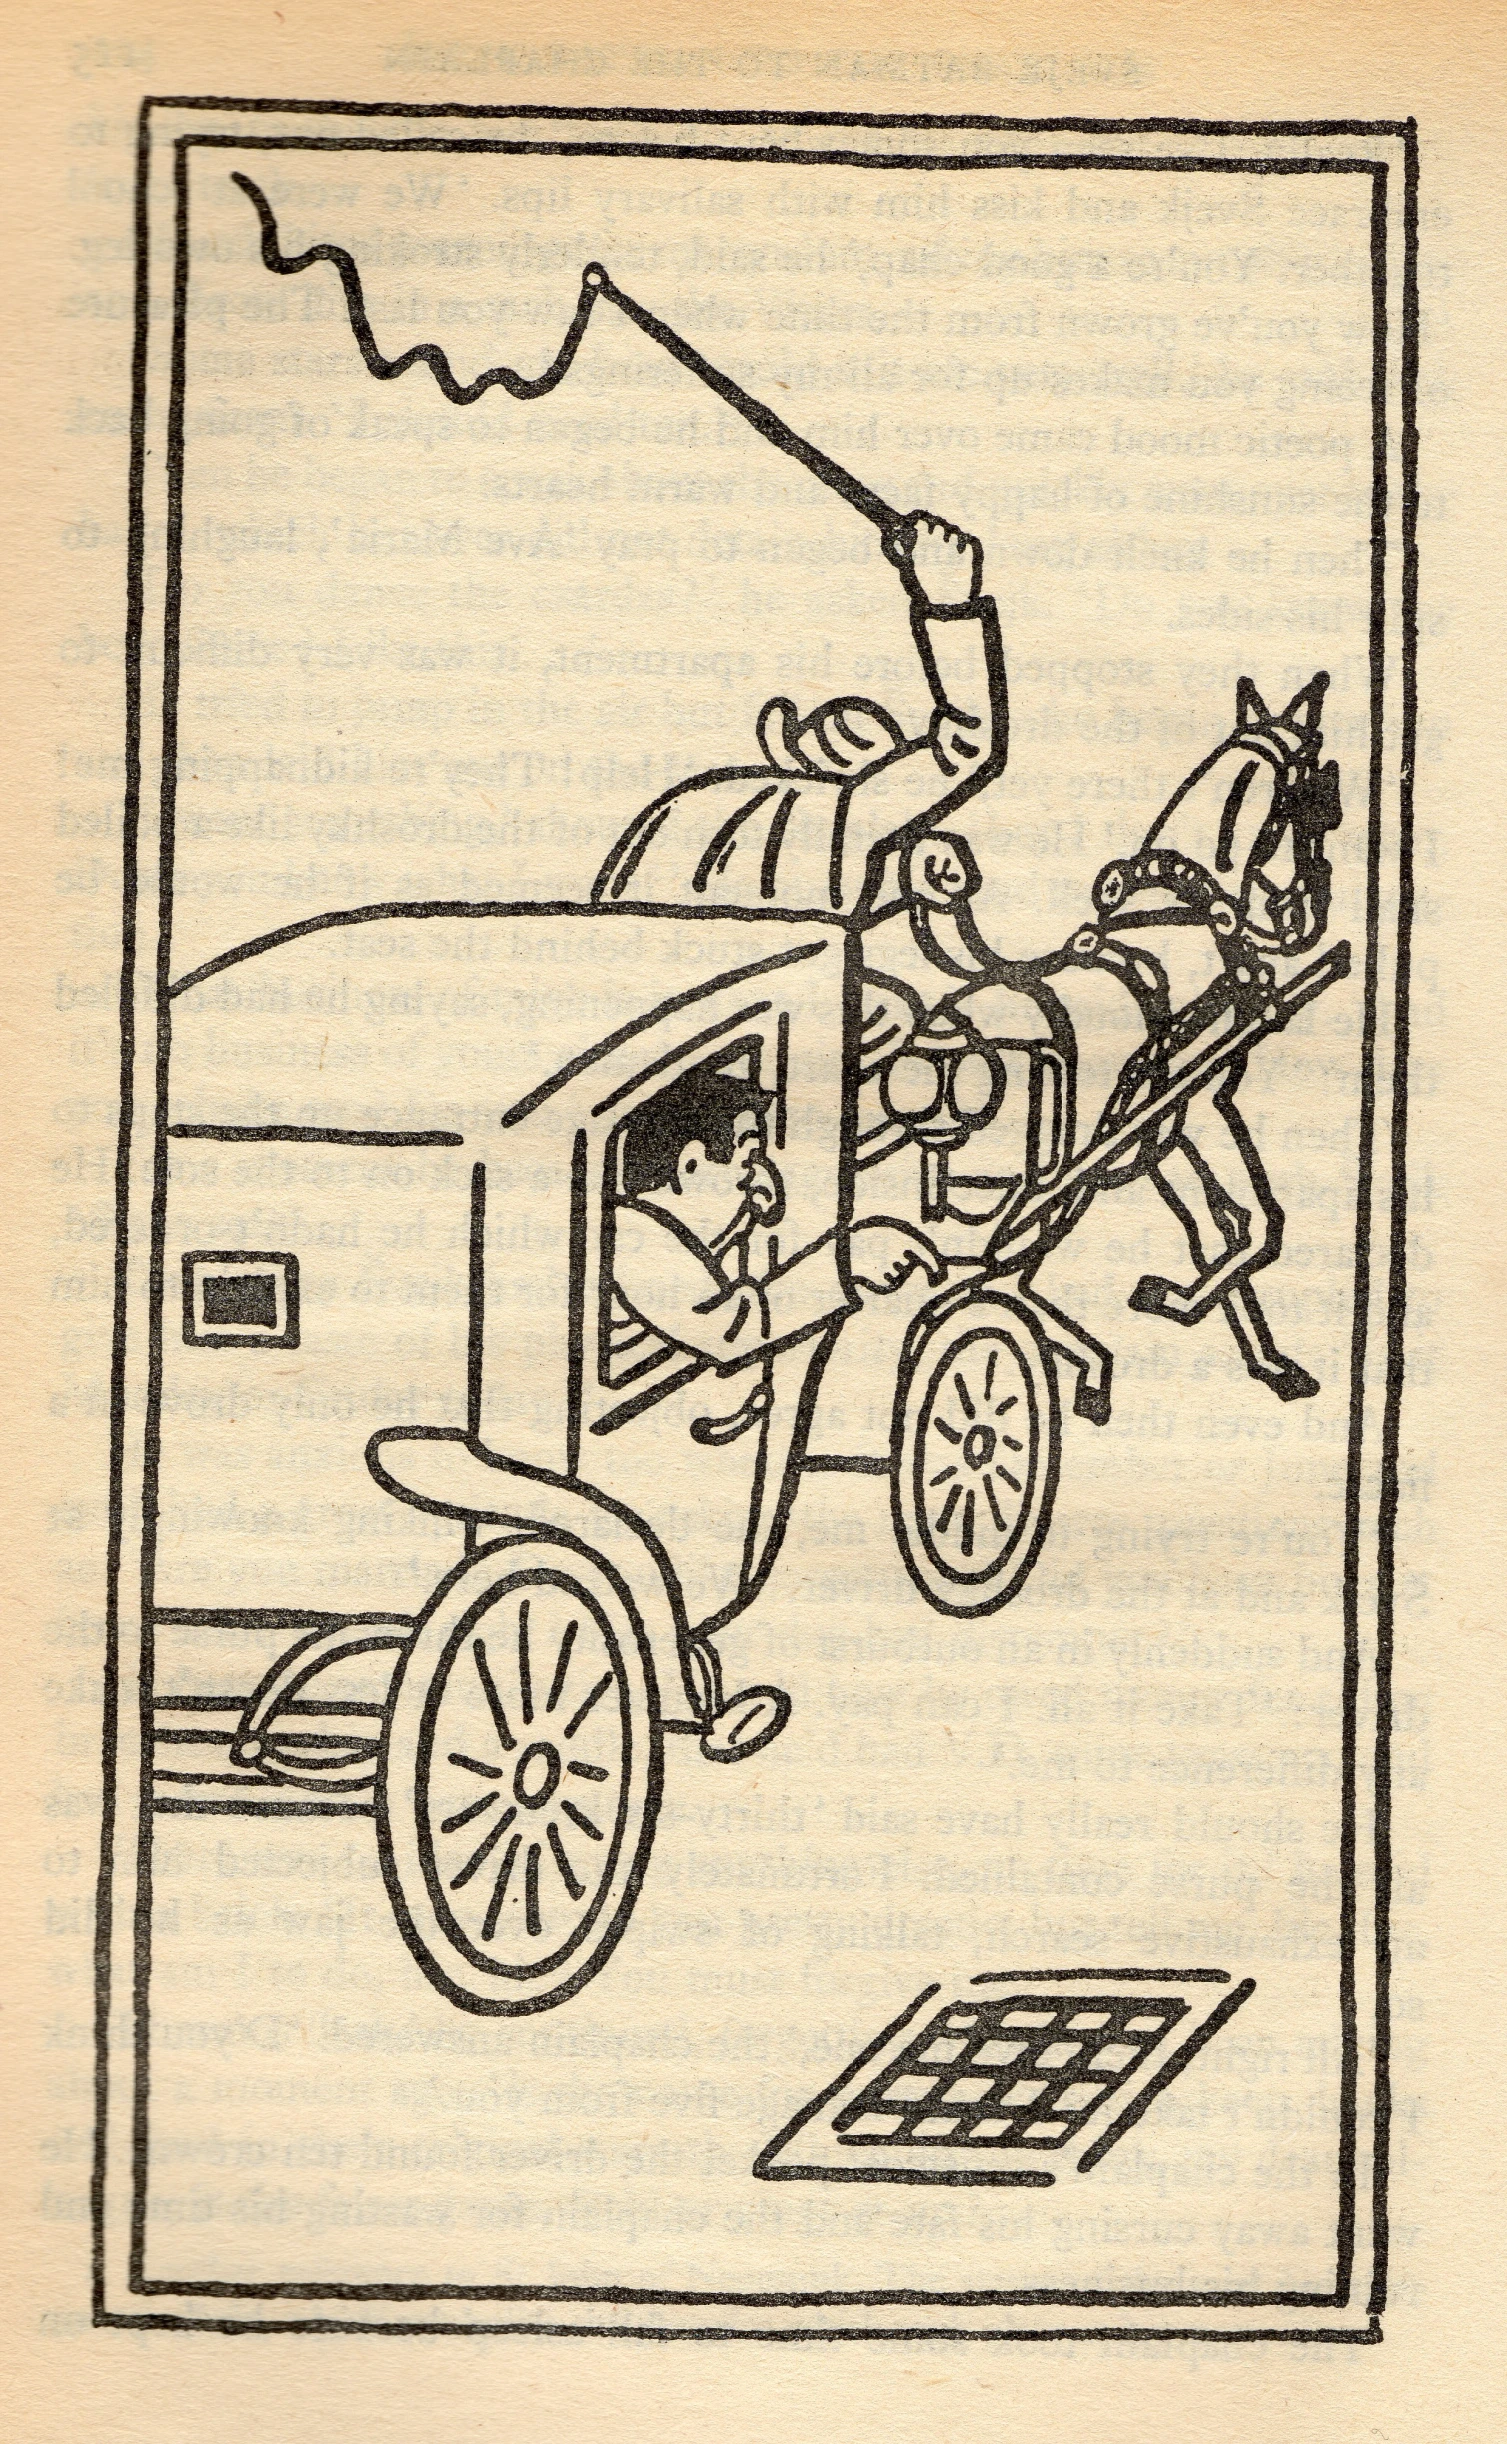 an image of a book with a drawing of a carriage in it